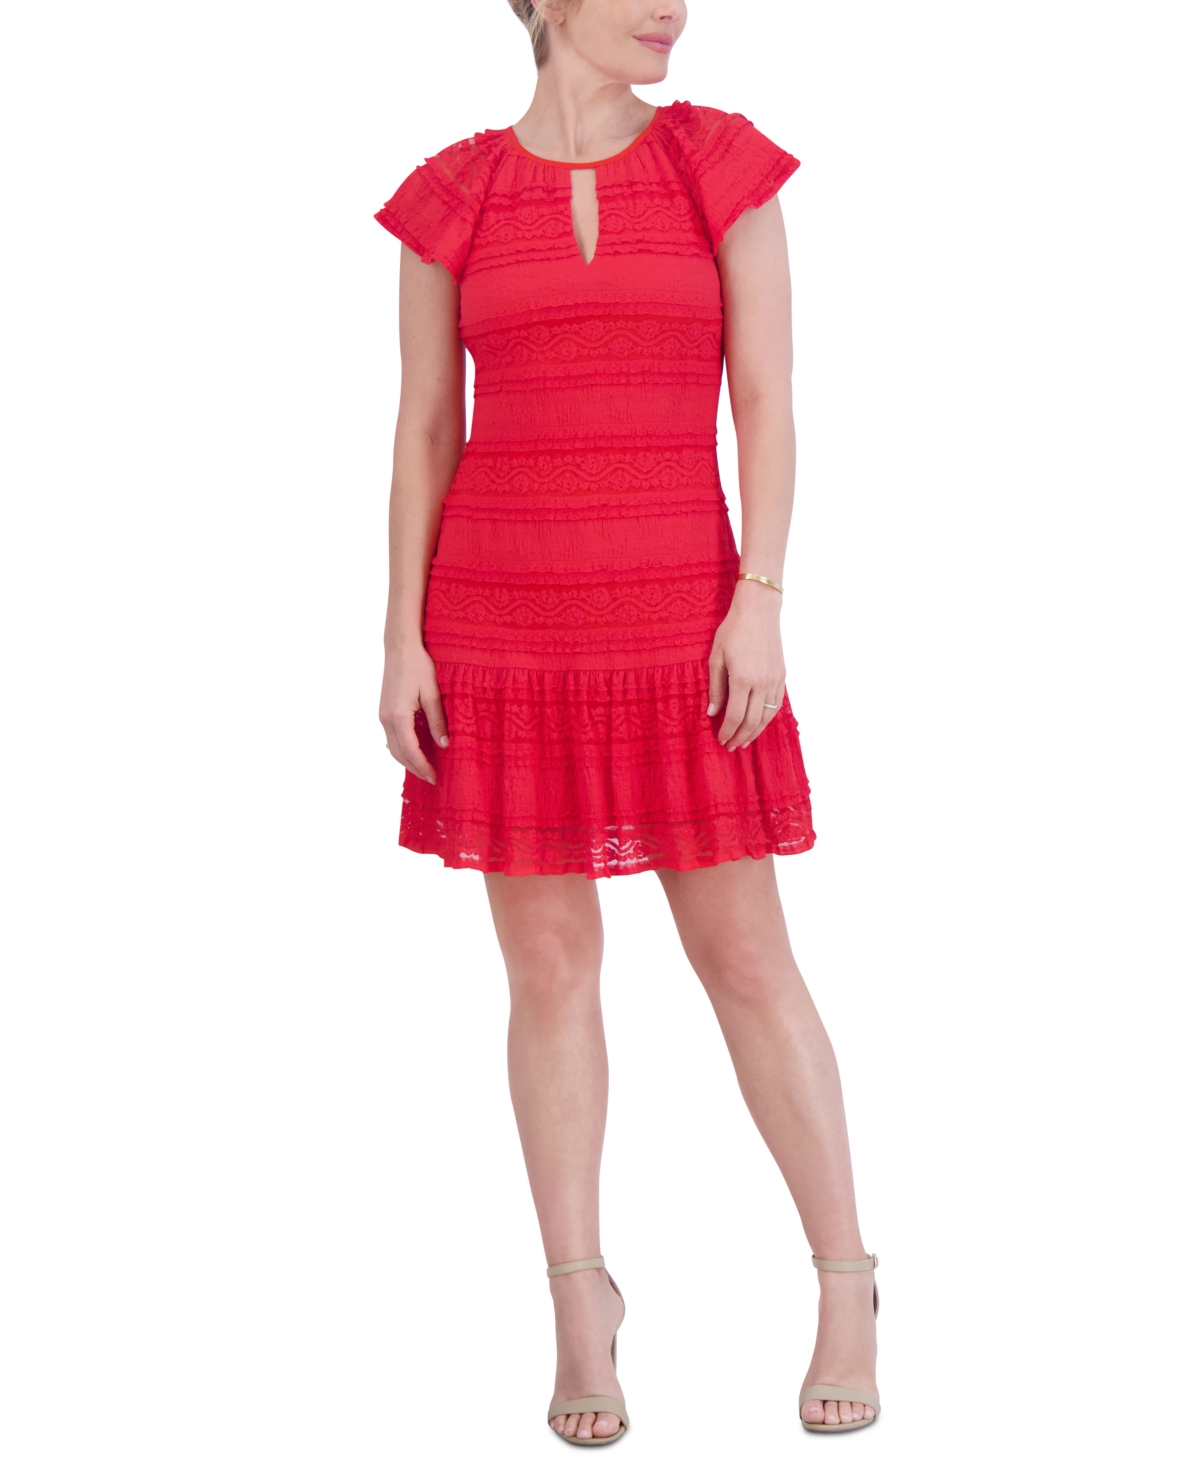 Women's Lace A-Line Dress - Red